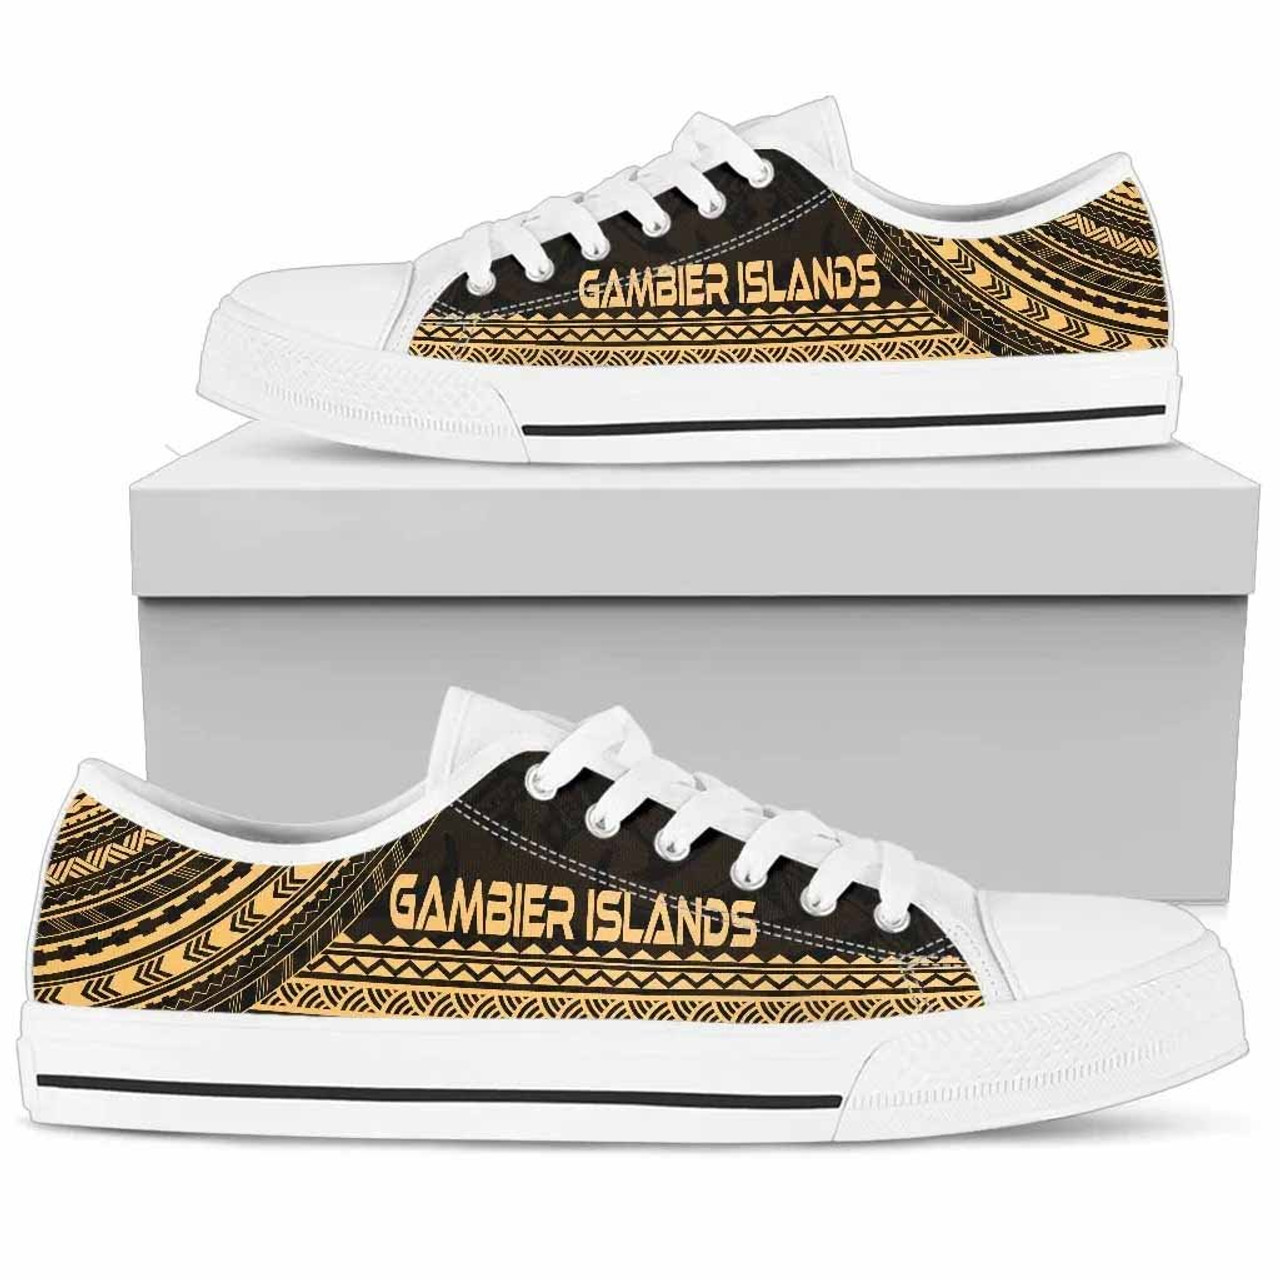 Gambier Islands Low Top Shoes - Polynesian Gold Chief Version 3